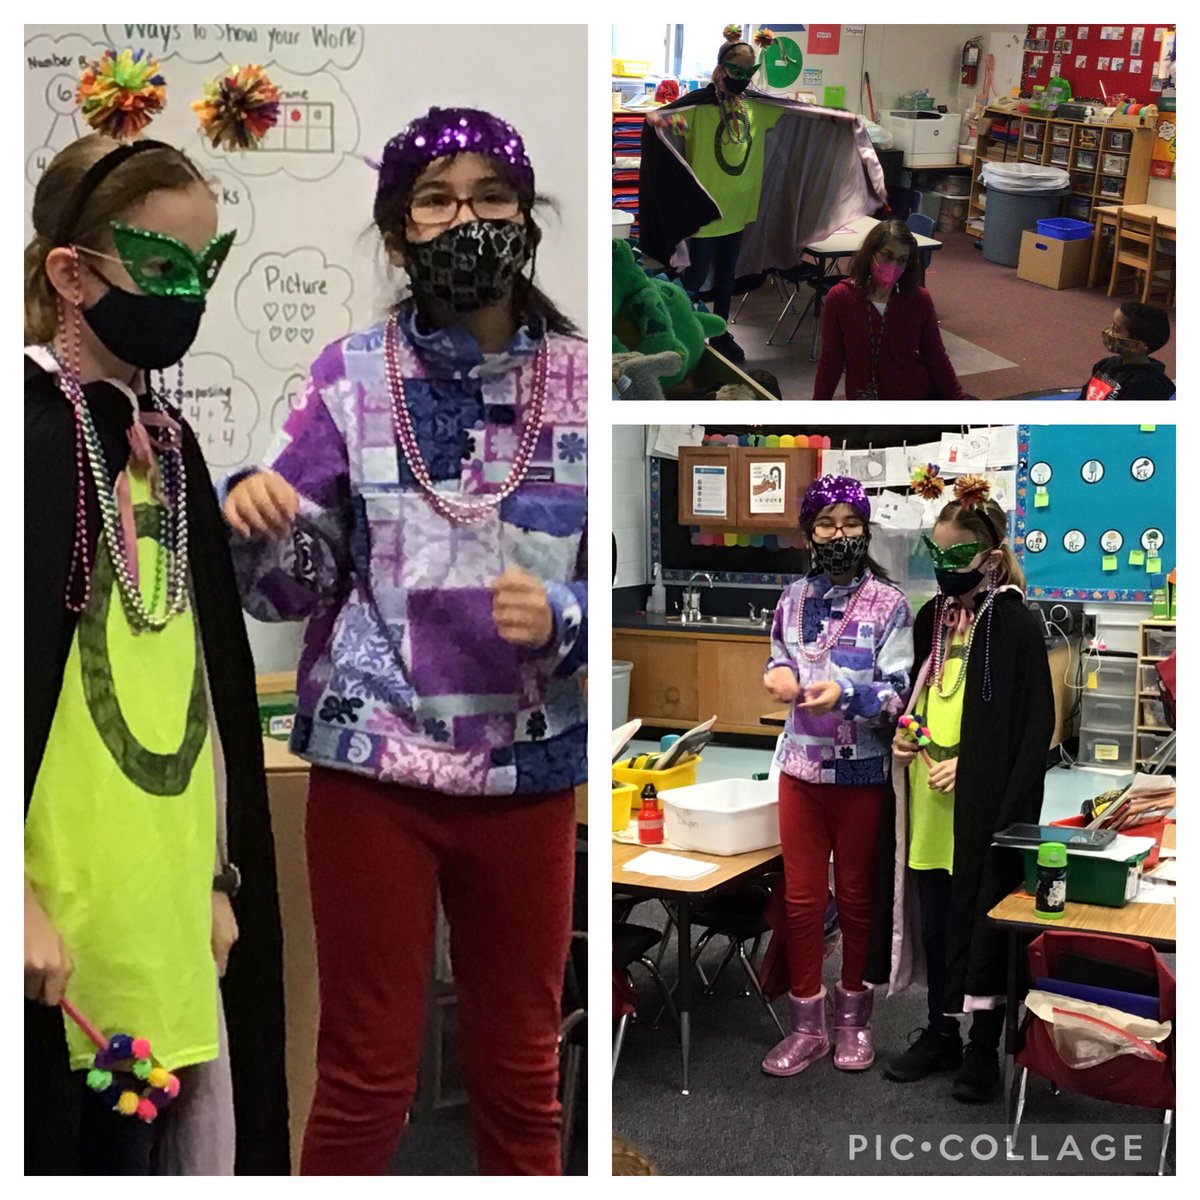 Happy 70th Day of School from Zero the Hero! <a target='_blank' href='http://twitter.com/CampbellAPS'>@CampbellAPS</a> <a target='_blank' href='http://twitter.com/APSMath'>@APSMath</a> <a target='_blank' href='http://twitter.com/APSGifted'>@APSGifted</a> <a target='_blank' href='http://twitter.com/ELeducation'>@ELeducation</a> <a target='_blank' href='http://twitter.com/mskleif'>@mskleif</a> <a target='_blank' href='https://t.co/PtFmQyCij2'>https://t.co/PtFmQyCij2</a>